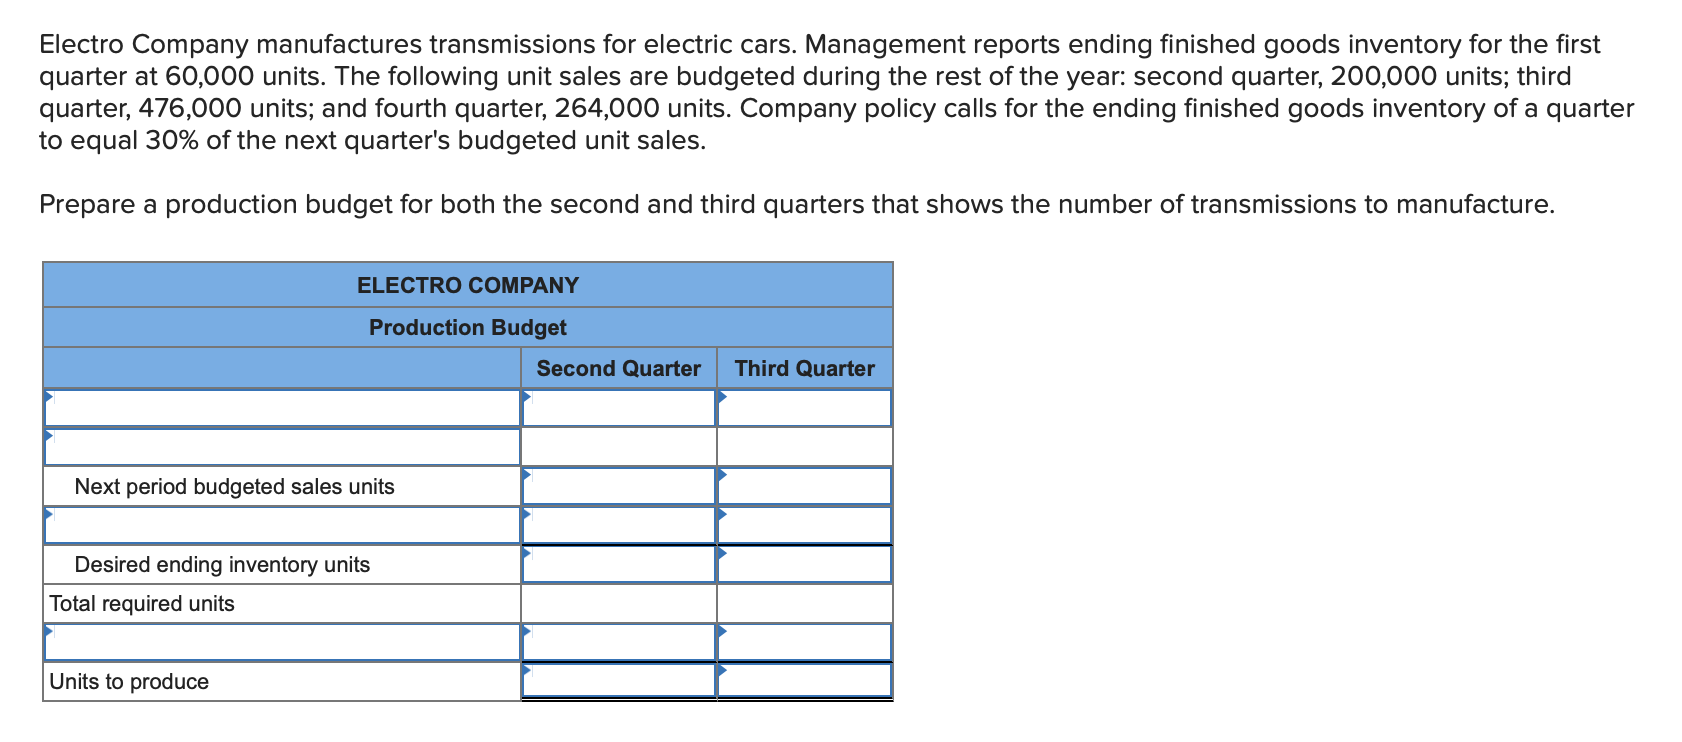 Electro Company manufactures transmissions for electric cars. Management reports ending finished goods inventory for the firs